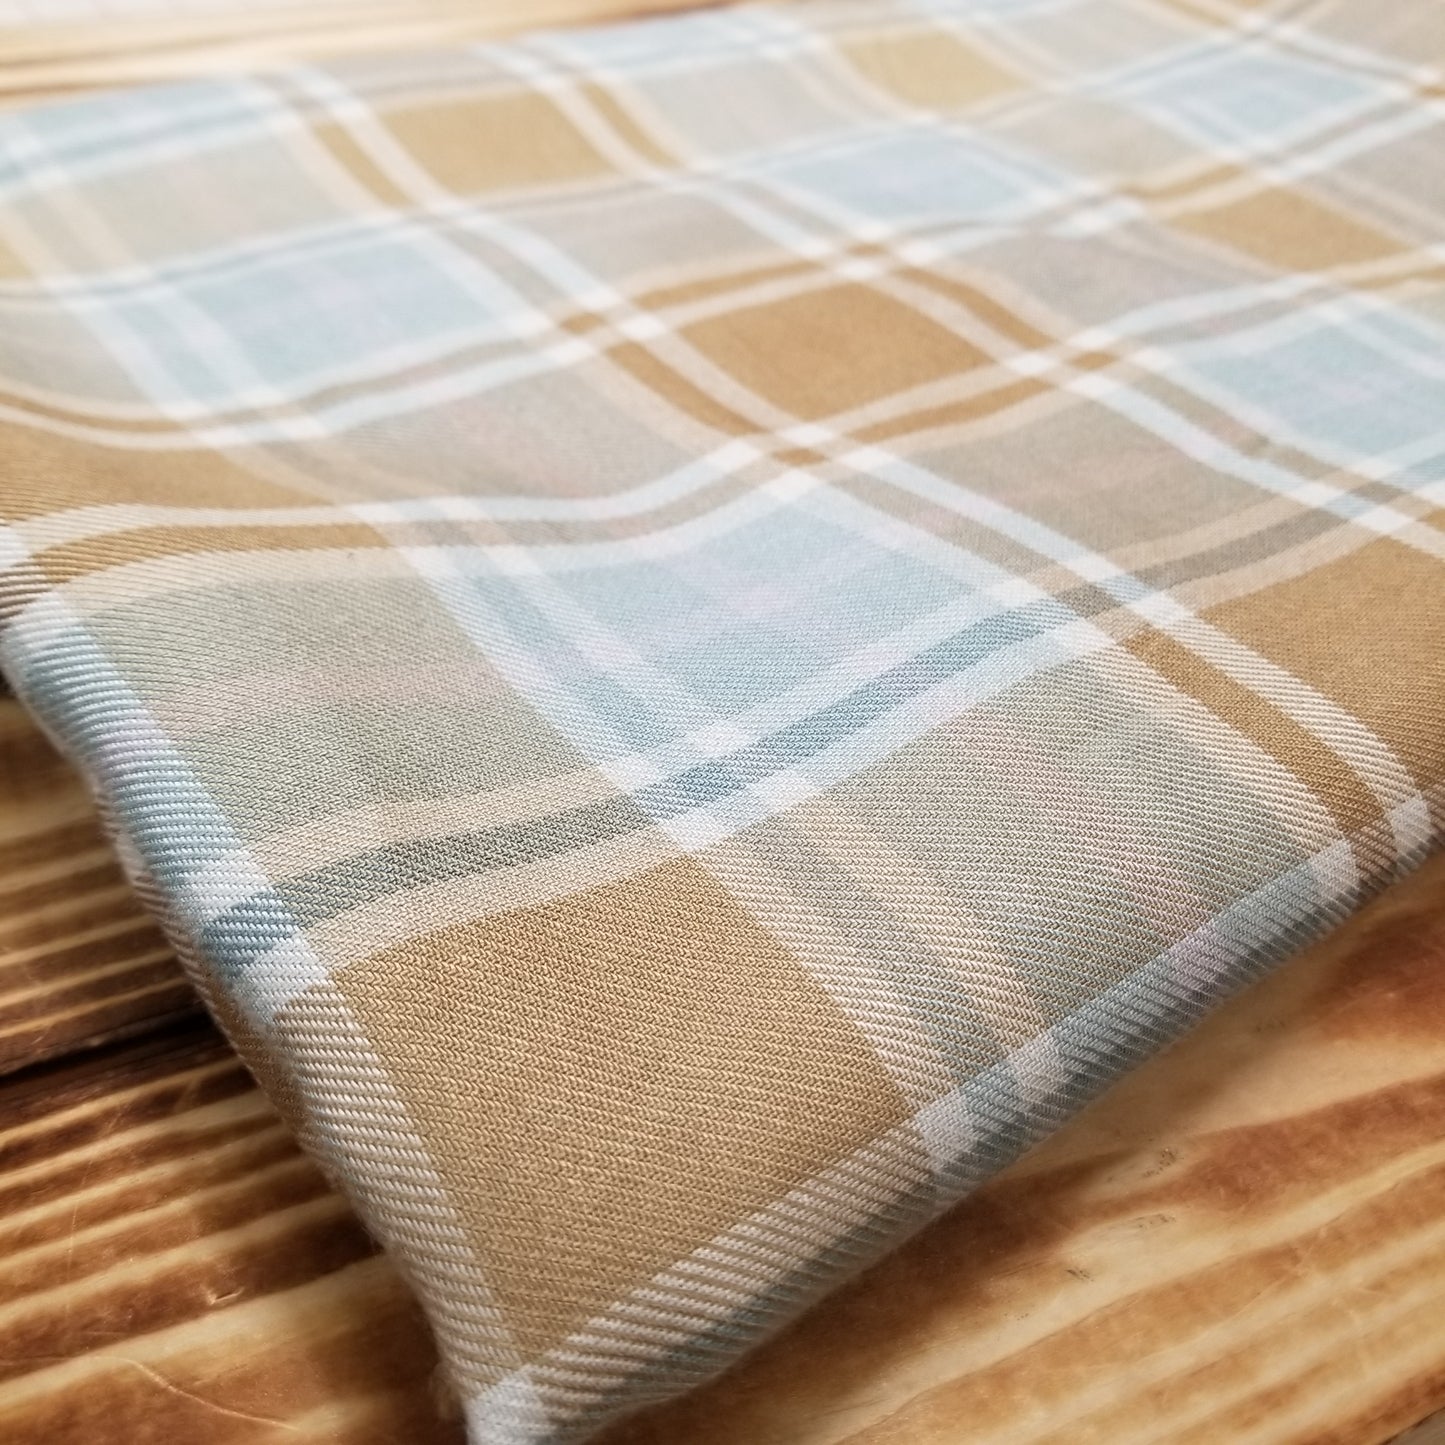 Designer Deadstock Glendora Baby Blue and Khaki Slight Sheen Plaid Rayon Twill Woven- Sold by the yard